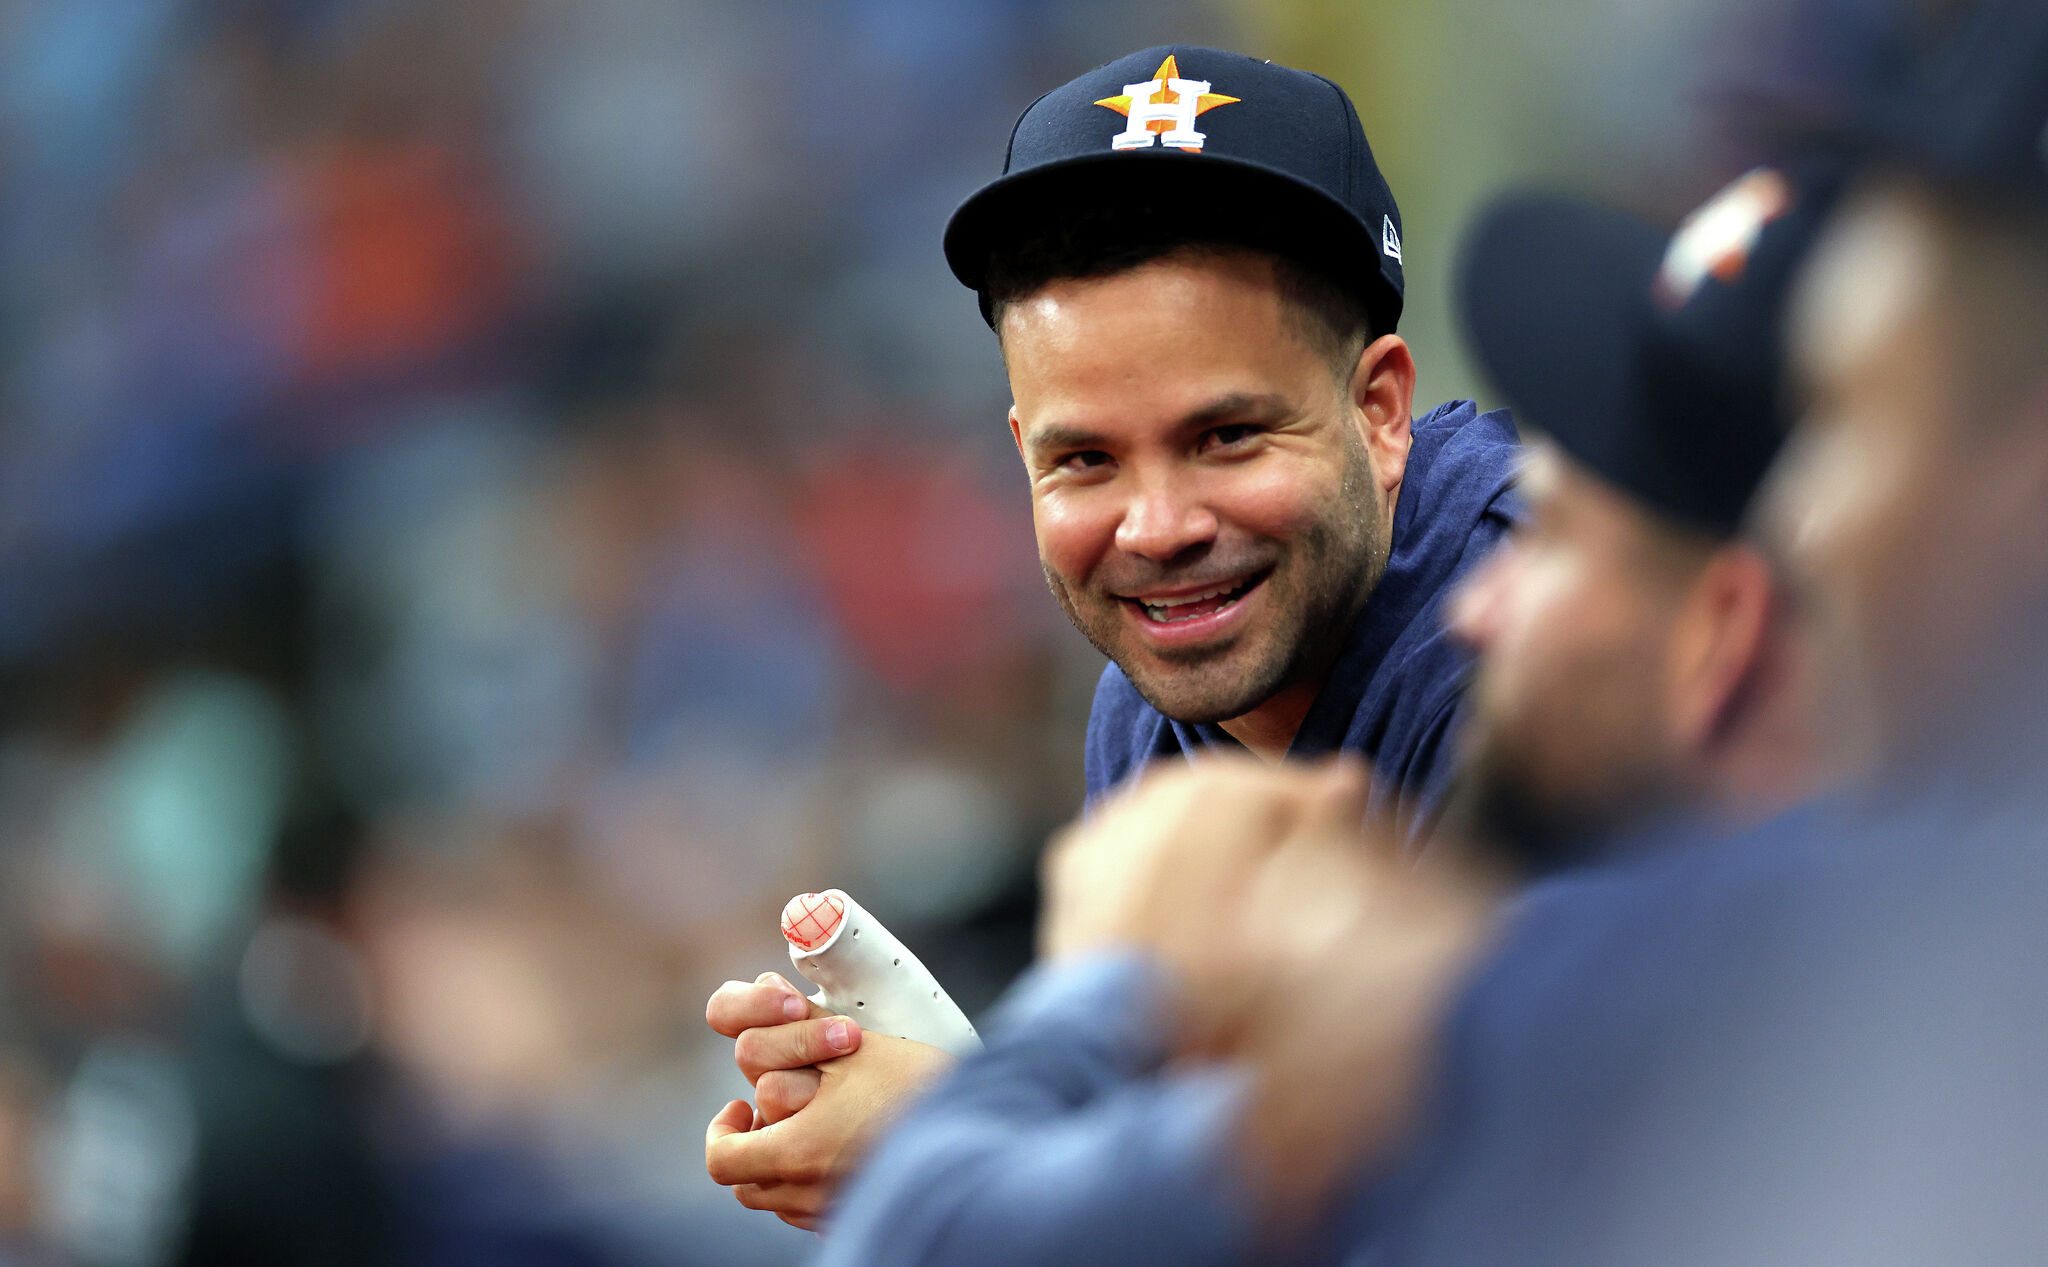 Houston Astros' Jose Altuve to play at Sugar Land's Constellation Field for  rehab assignment